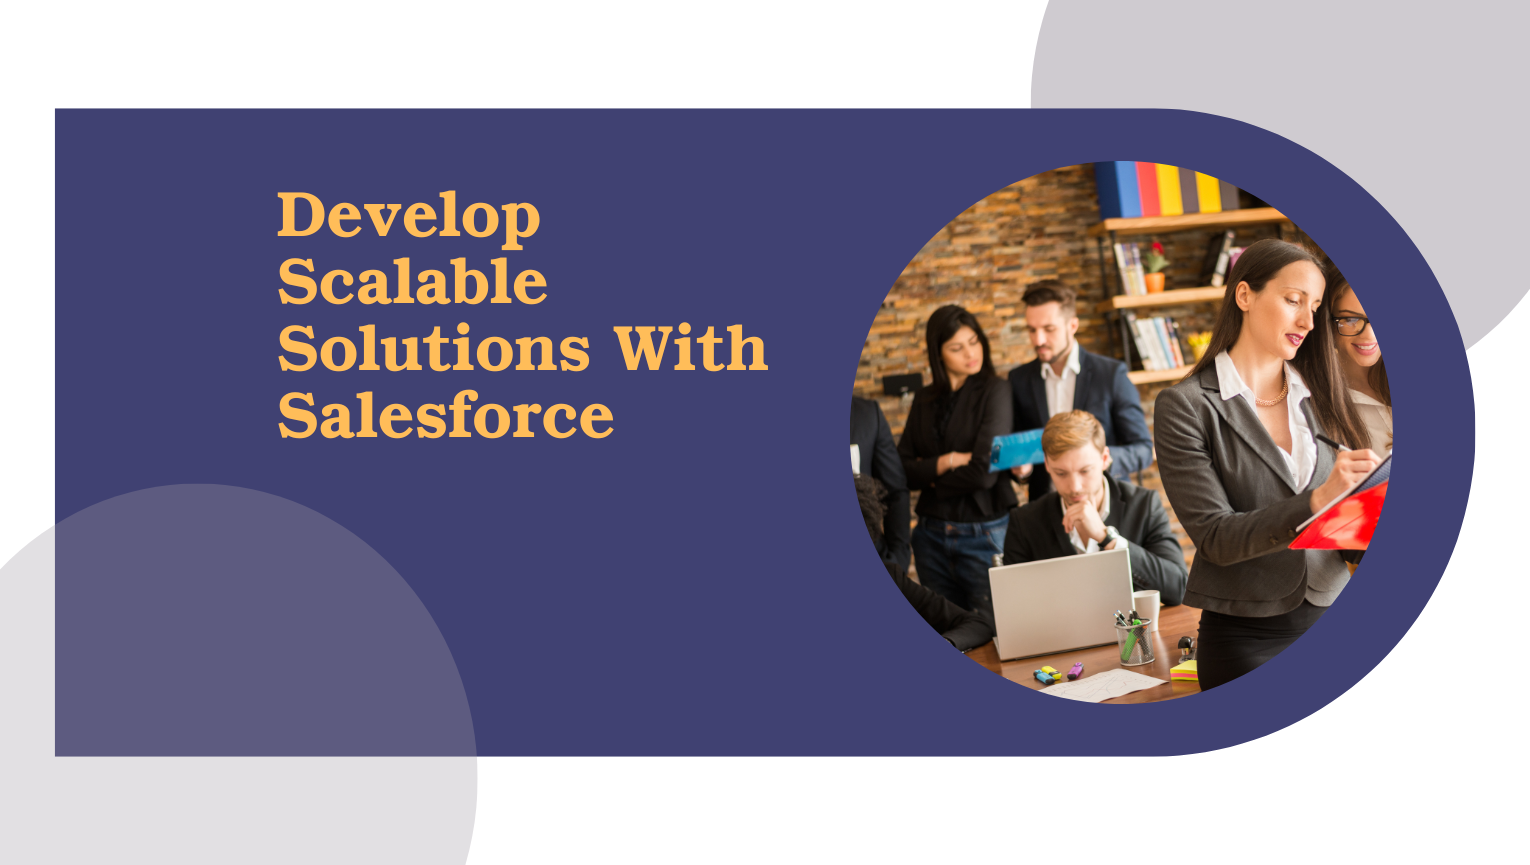 Develop Scalable Solutions With Salesforce